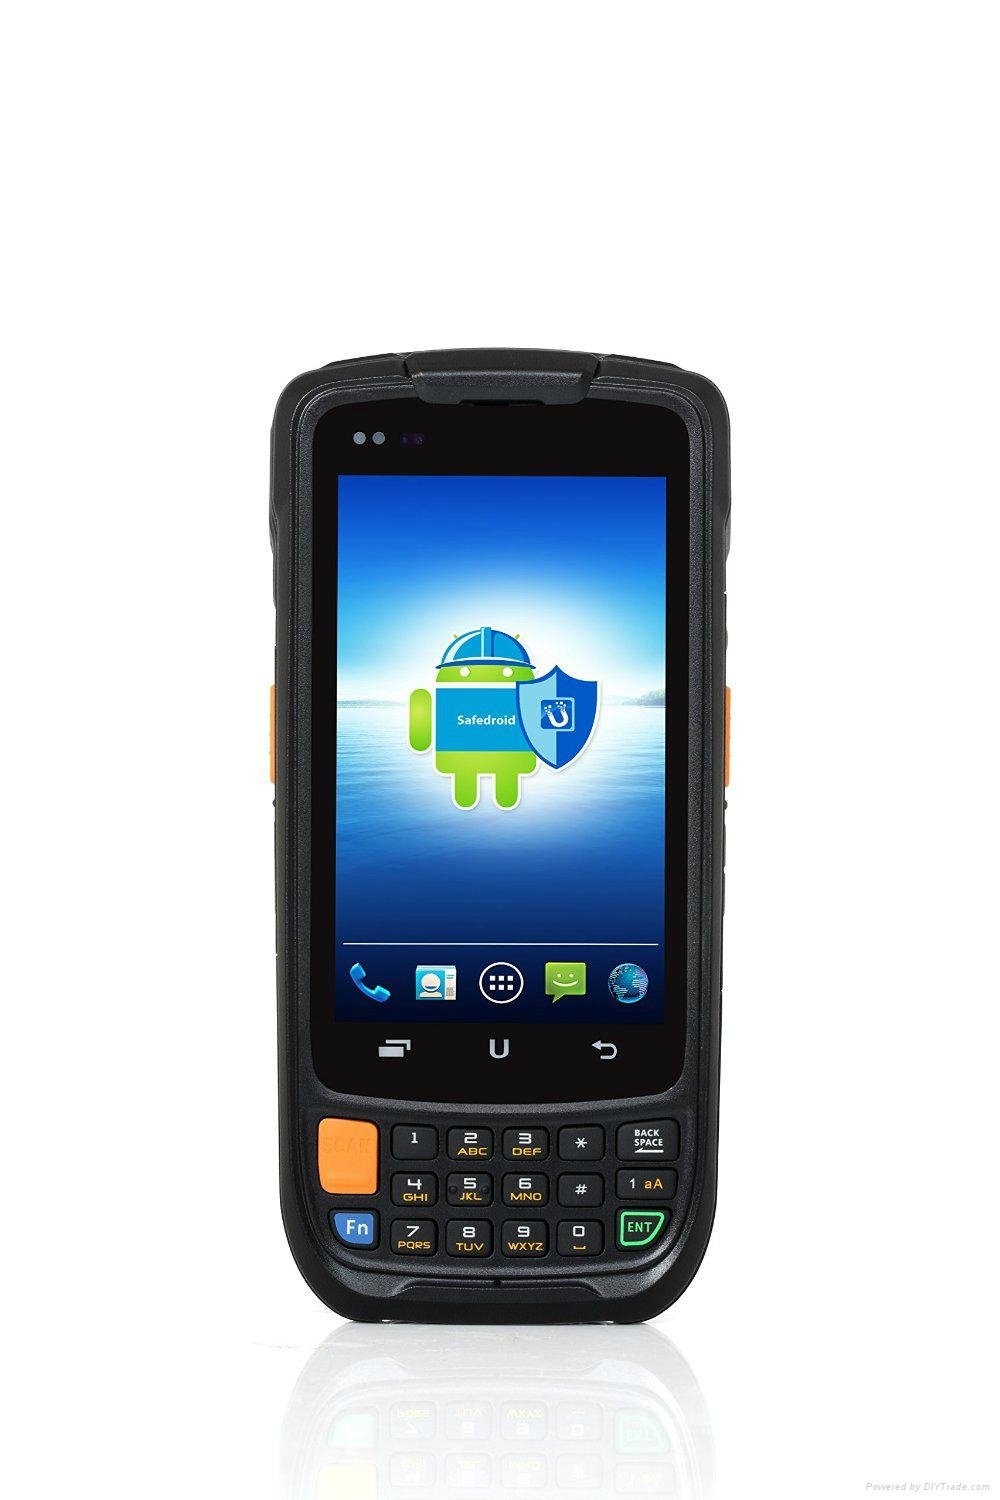 Industrial smart device Android PDA Data terminal SV-600 